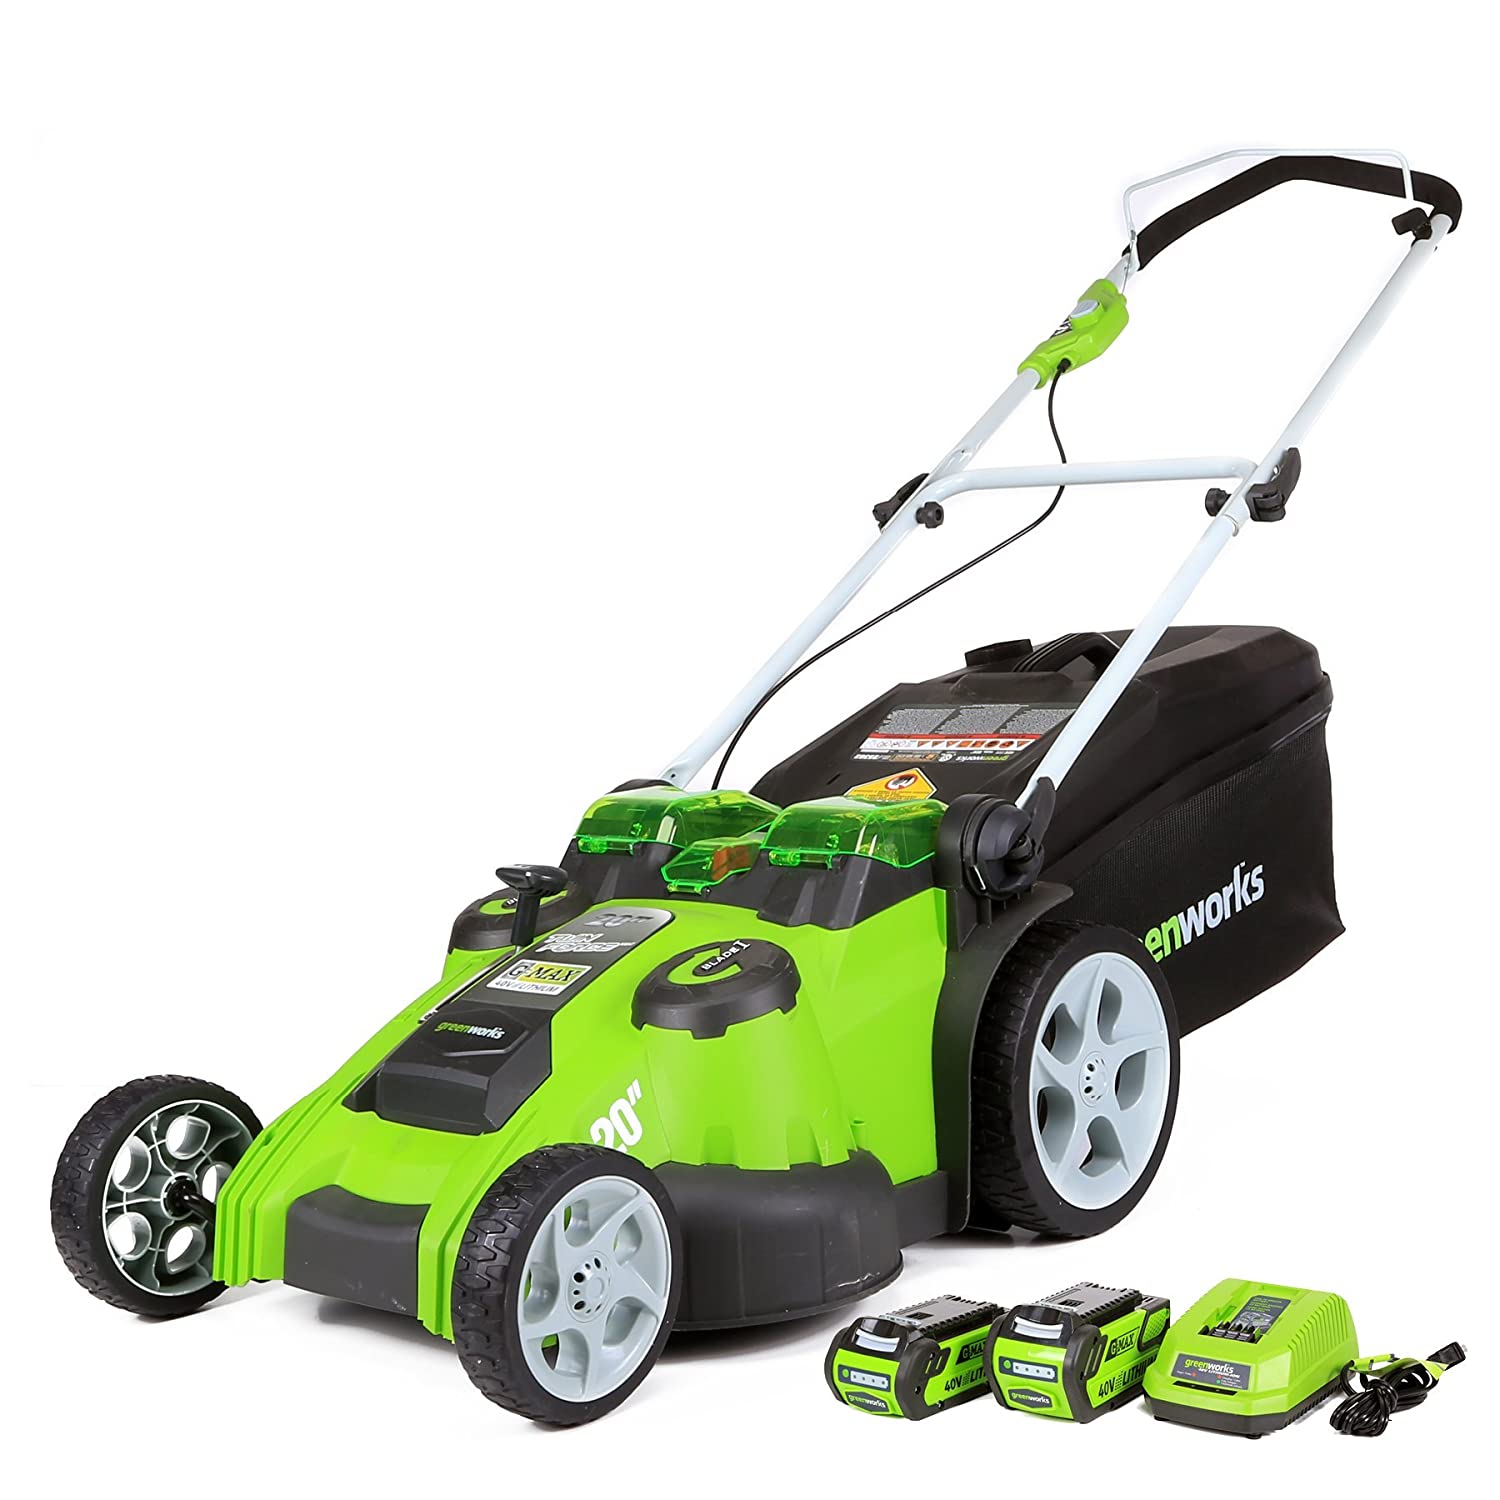 The Best Cordless Electric Lawn Mower (Top 4 Reviewed in ...